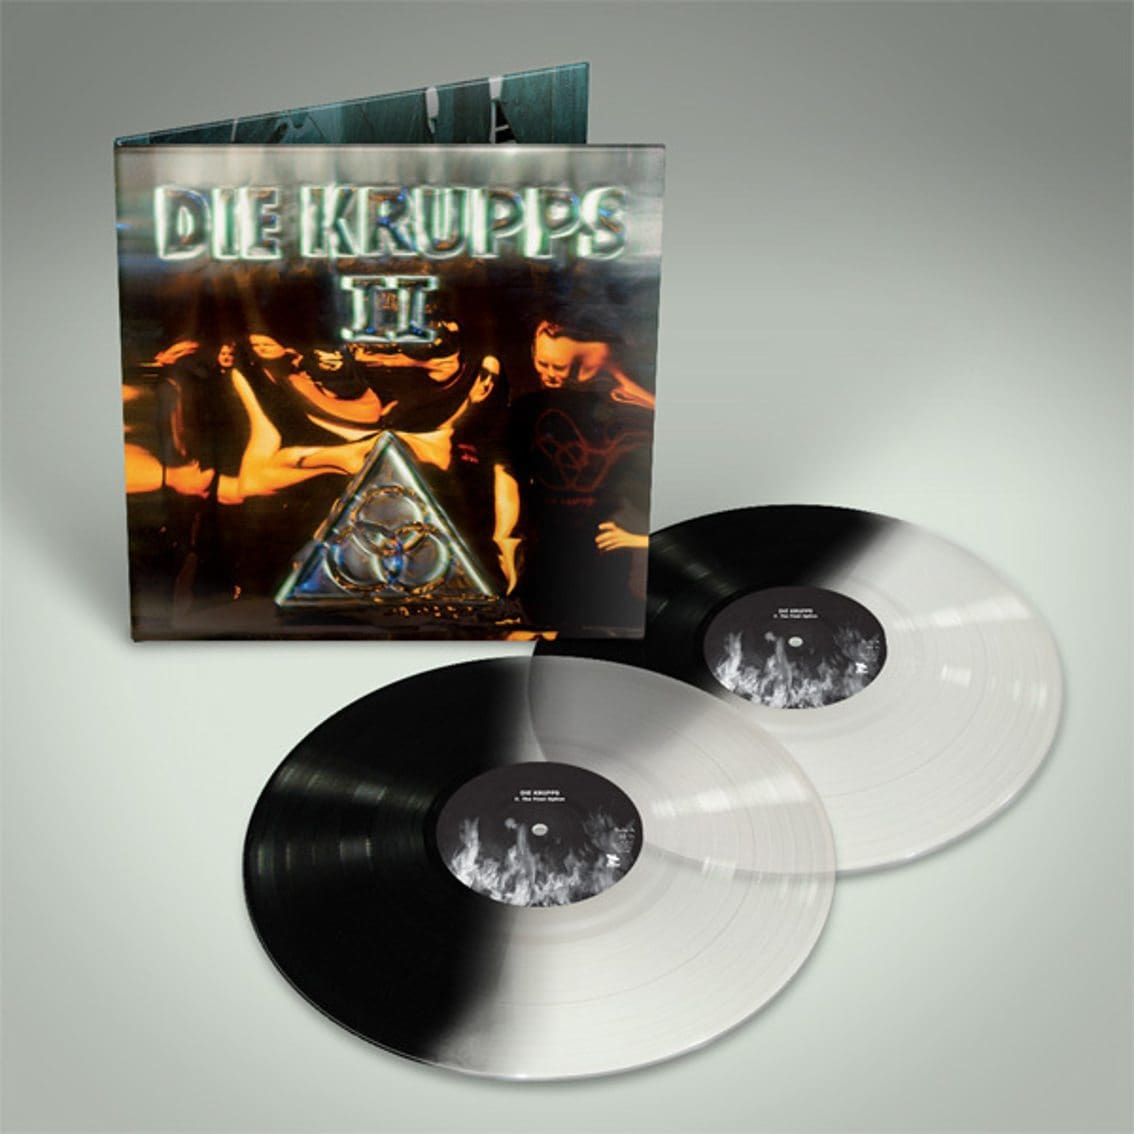 Die Krupps sees vinyl reissue of 'II: The Final Option' including 11 bonus remixes by The Sisters Of Mercy, Paradise Lost, ...